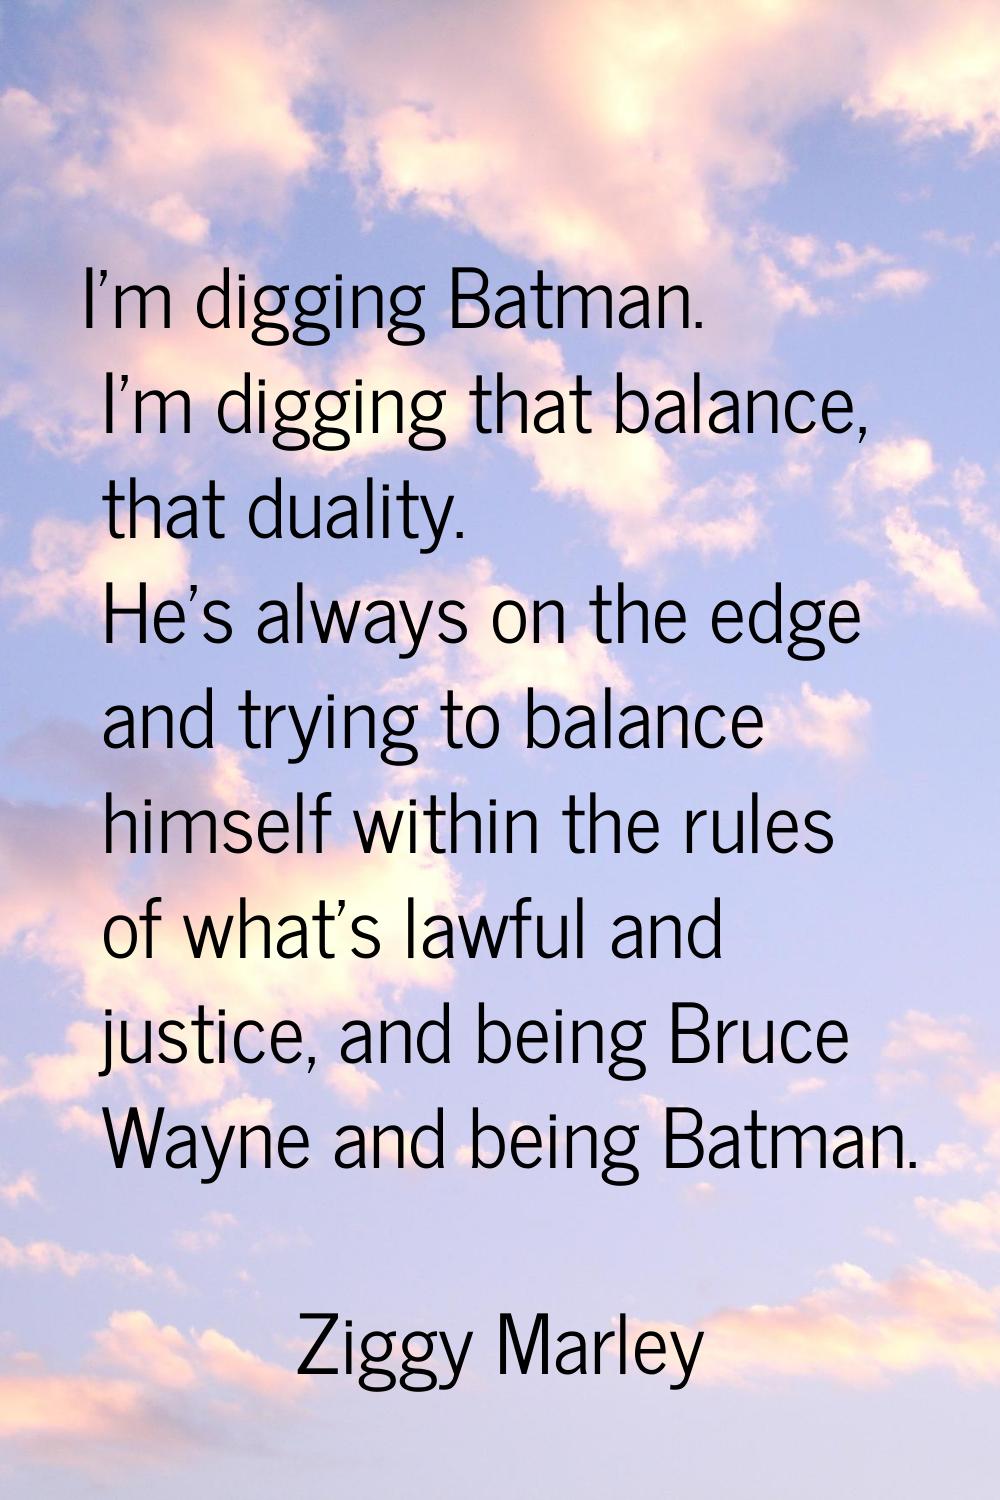 I'm digging Batman. I'm digging that balance, that duality. He's always on the edge and trying to b